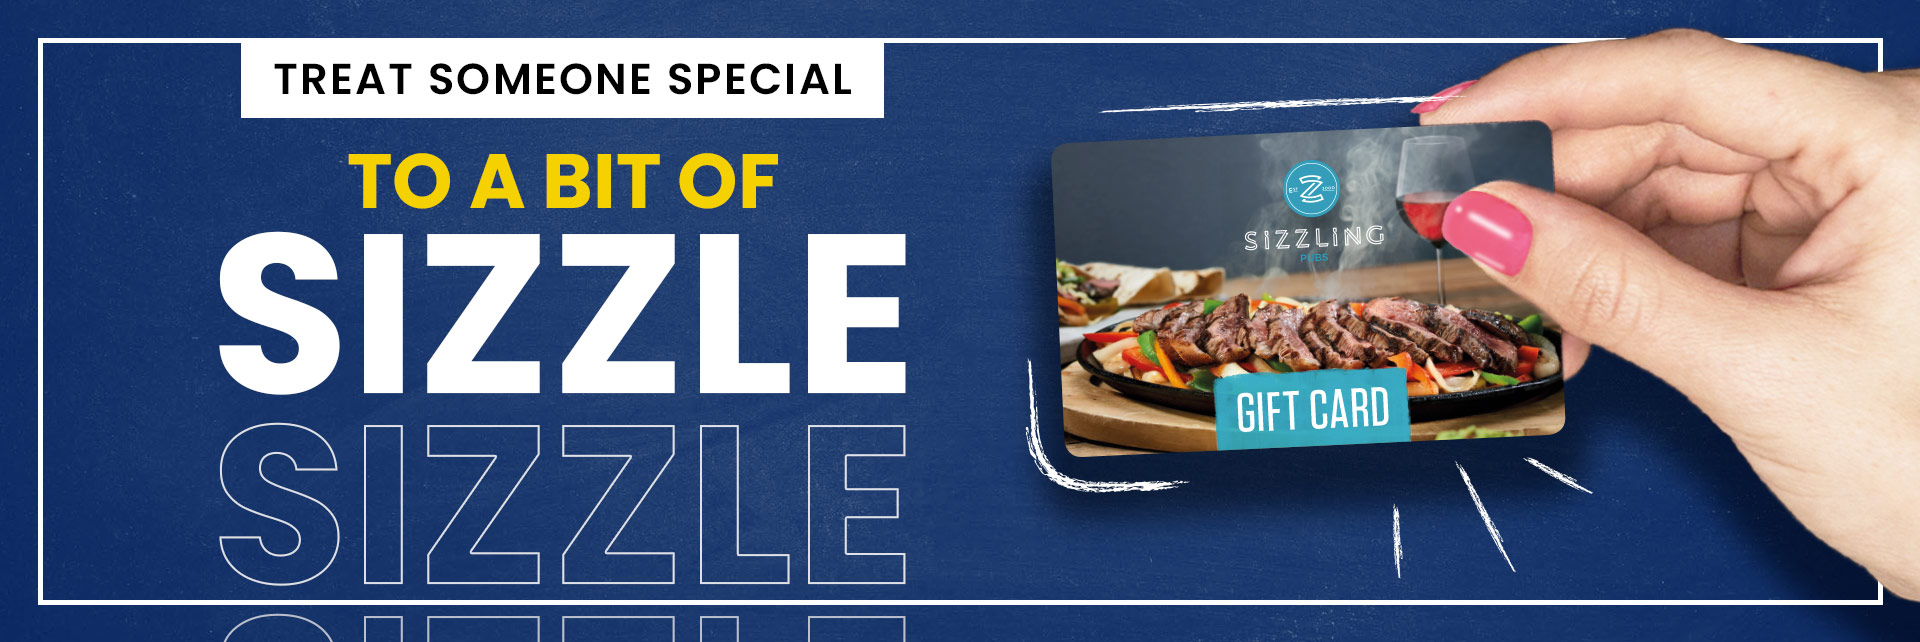 Sizzling Pubs Gift Card at The Tyler's Rest in Reading